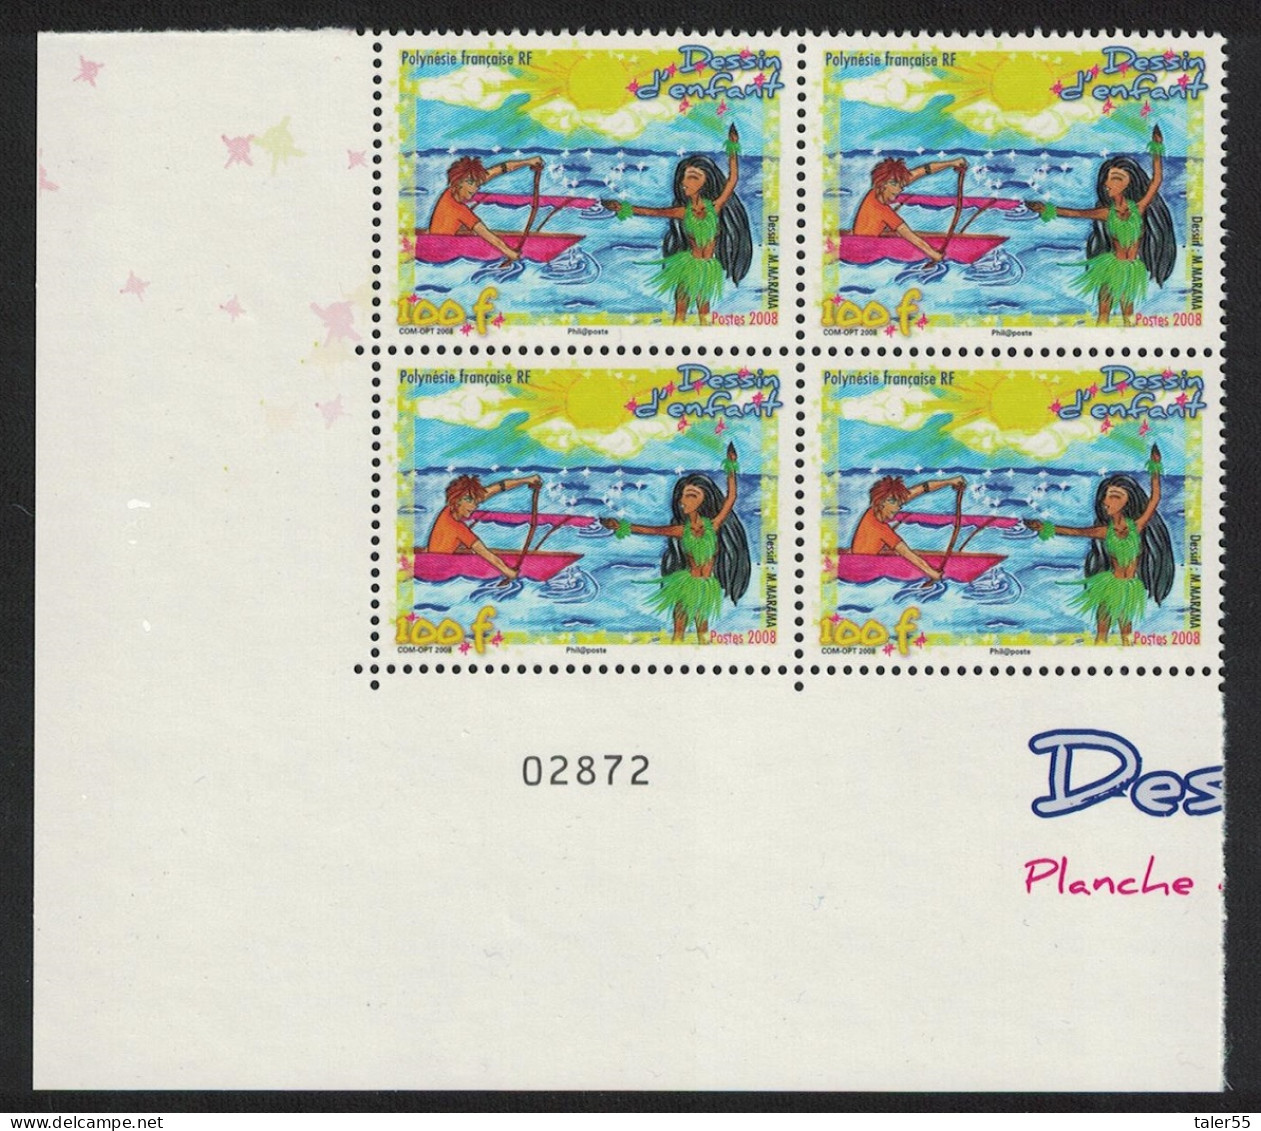 Fr. Polynesia Christmas Children's Drawings Block Of 4 Control Number 2008 MNH SG#1109 MI#1061 - Neufs